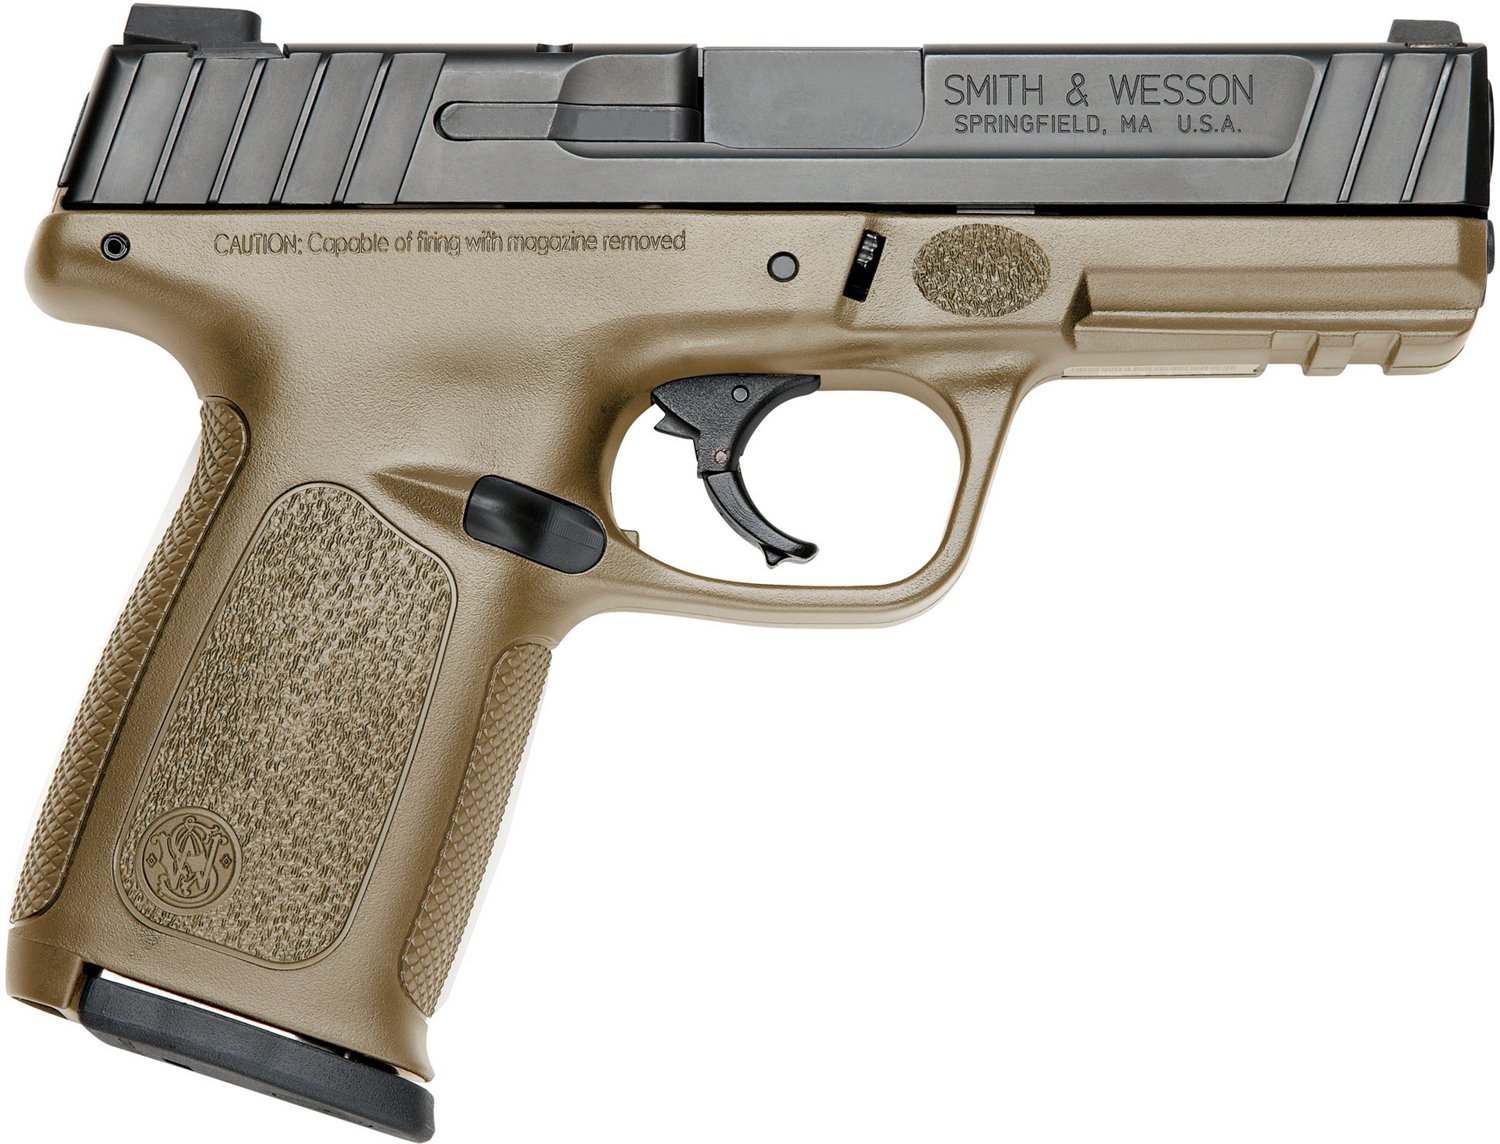 Specifically crafted for self-defense applications, the Smith & Wesson SD...